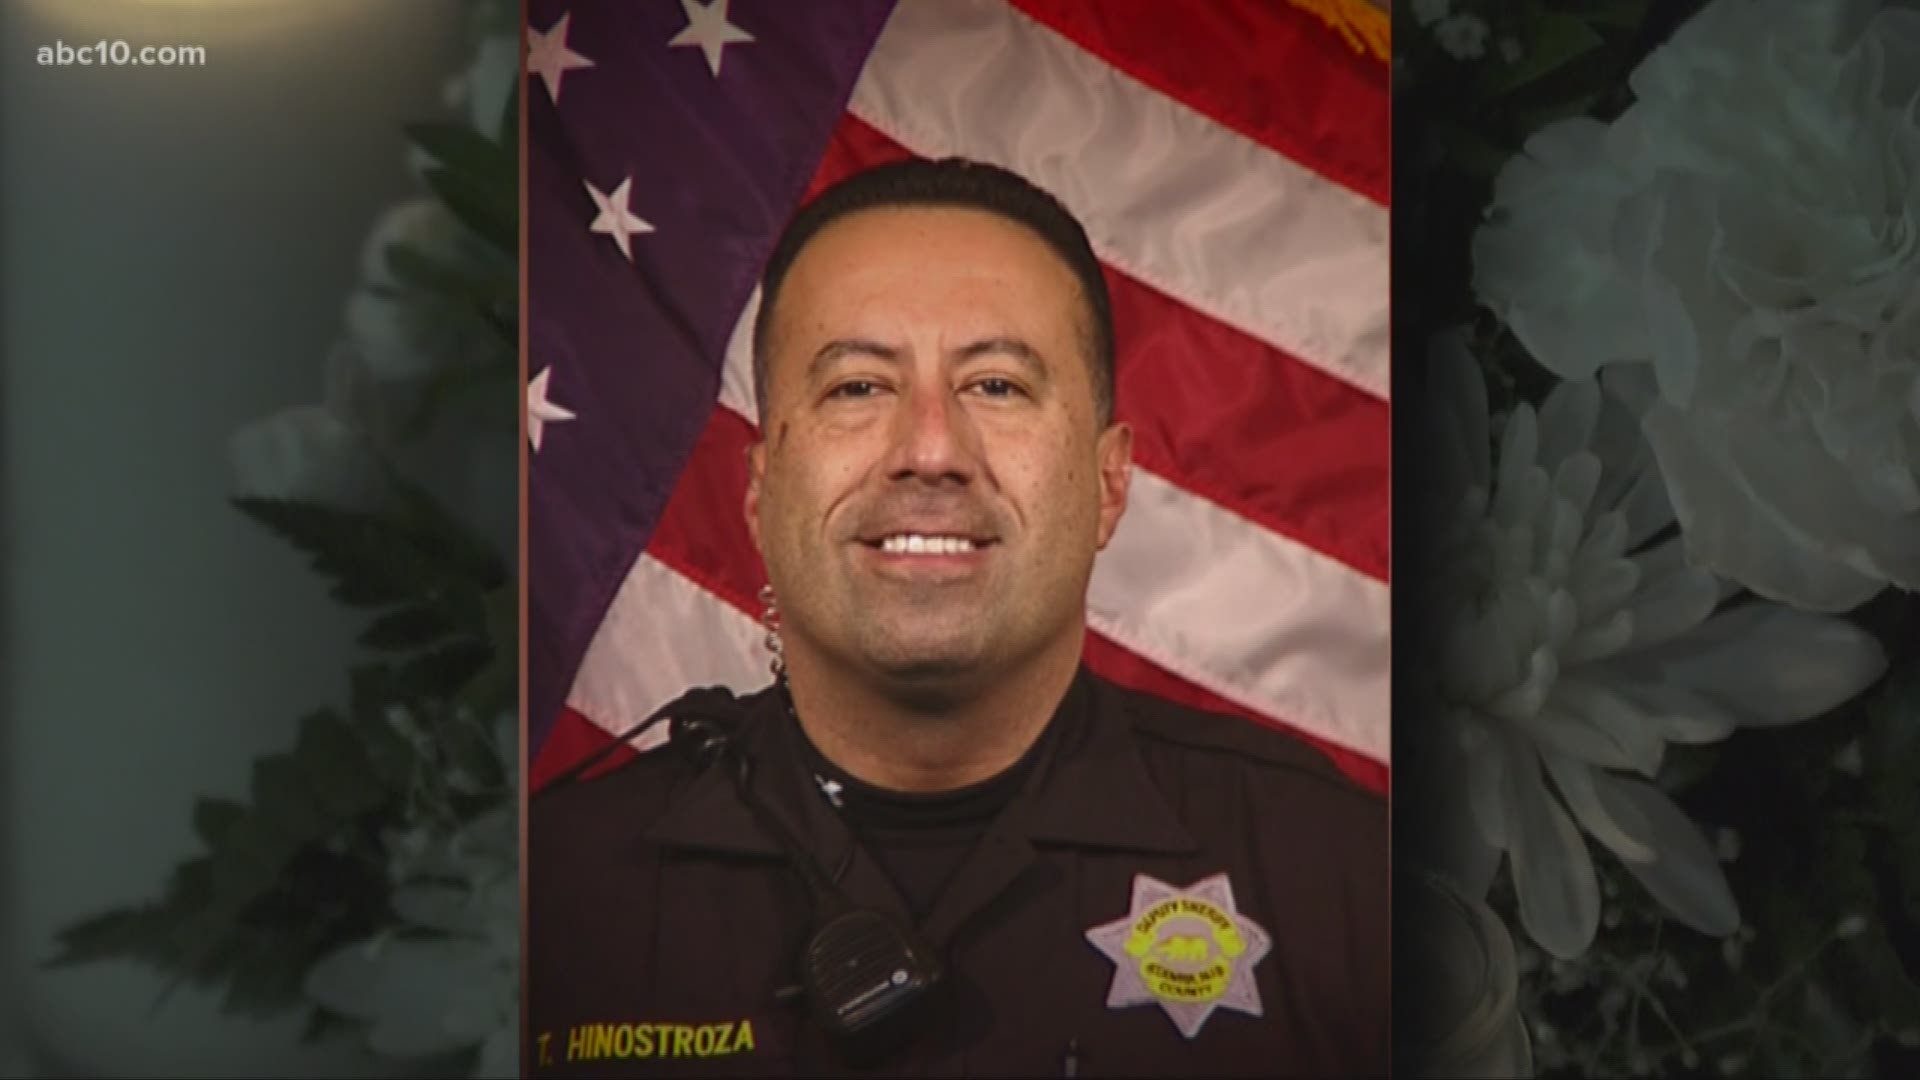 Friends and strangers paid their respects to Stanislaus County Sheriff's Deputy Tony Hinostroza at a makeshift memorial located at the site where he was killed.